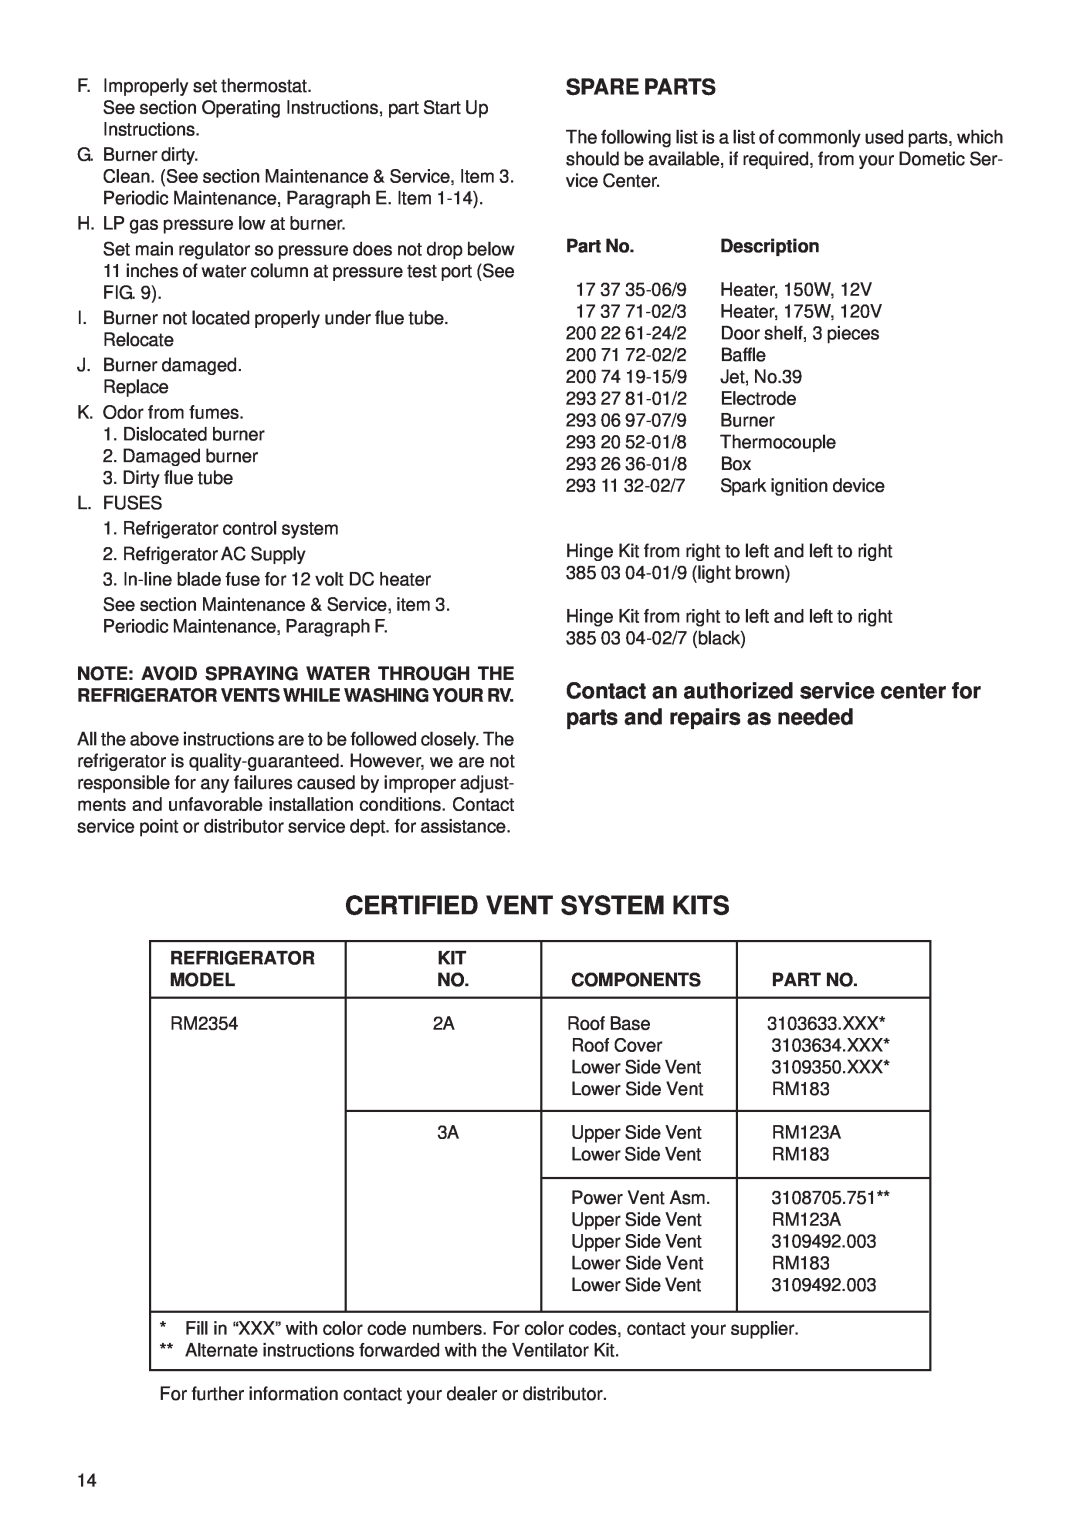 Dometic RM2354 manual Certified Vent System Kits, Spare Parts, Description, Refrigerator, Model, Components 